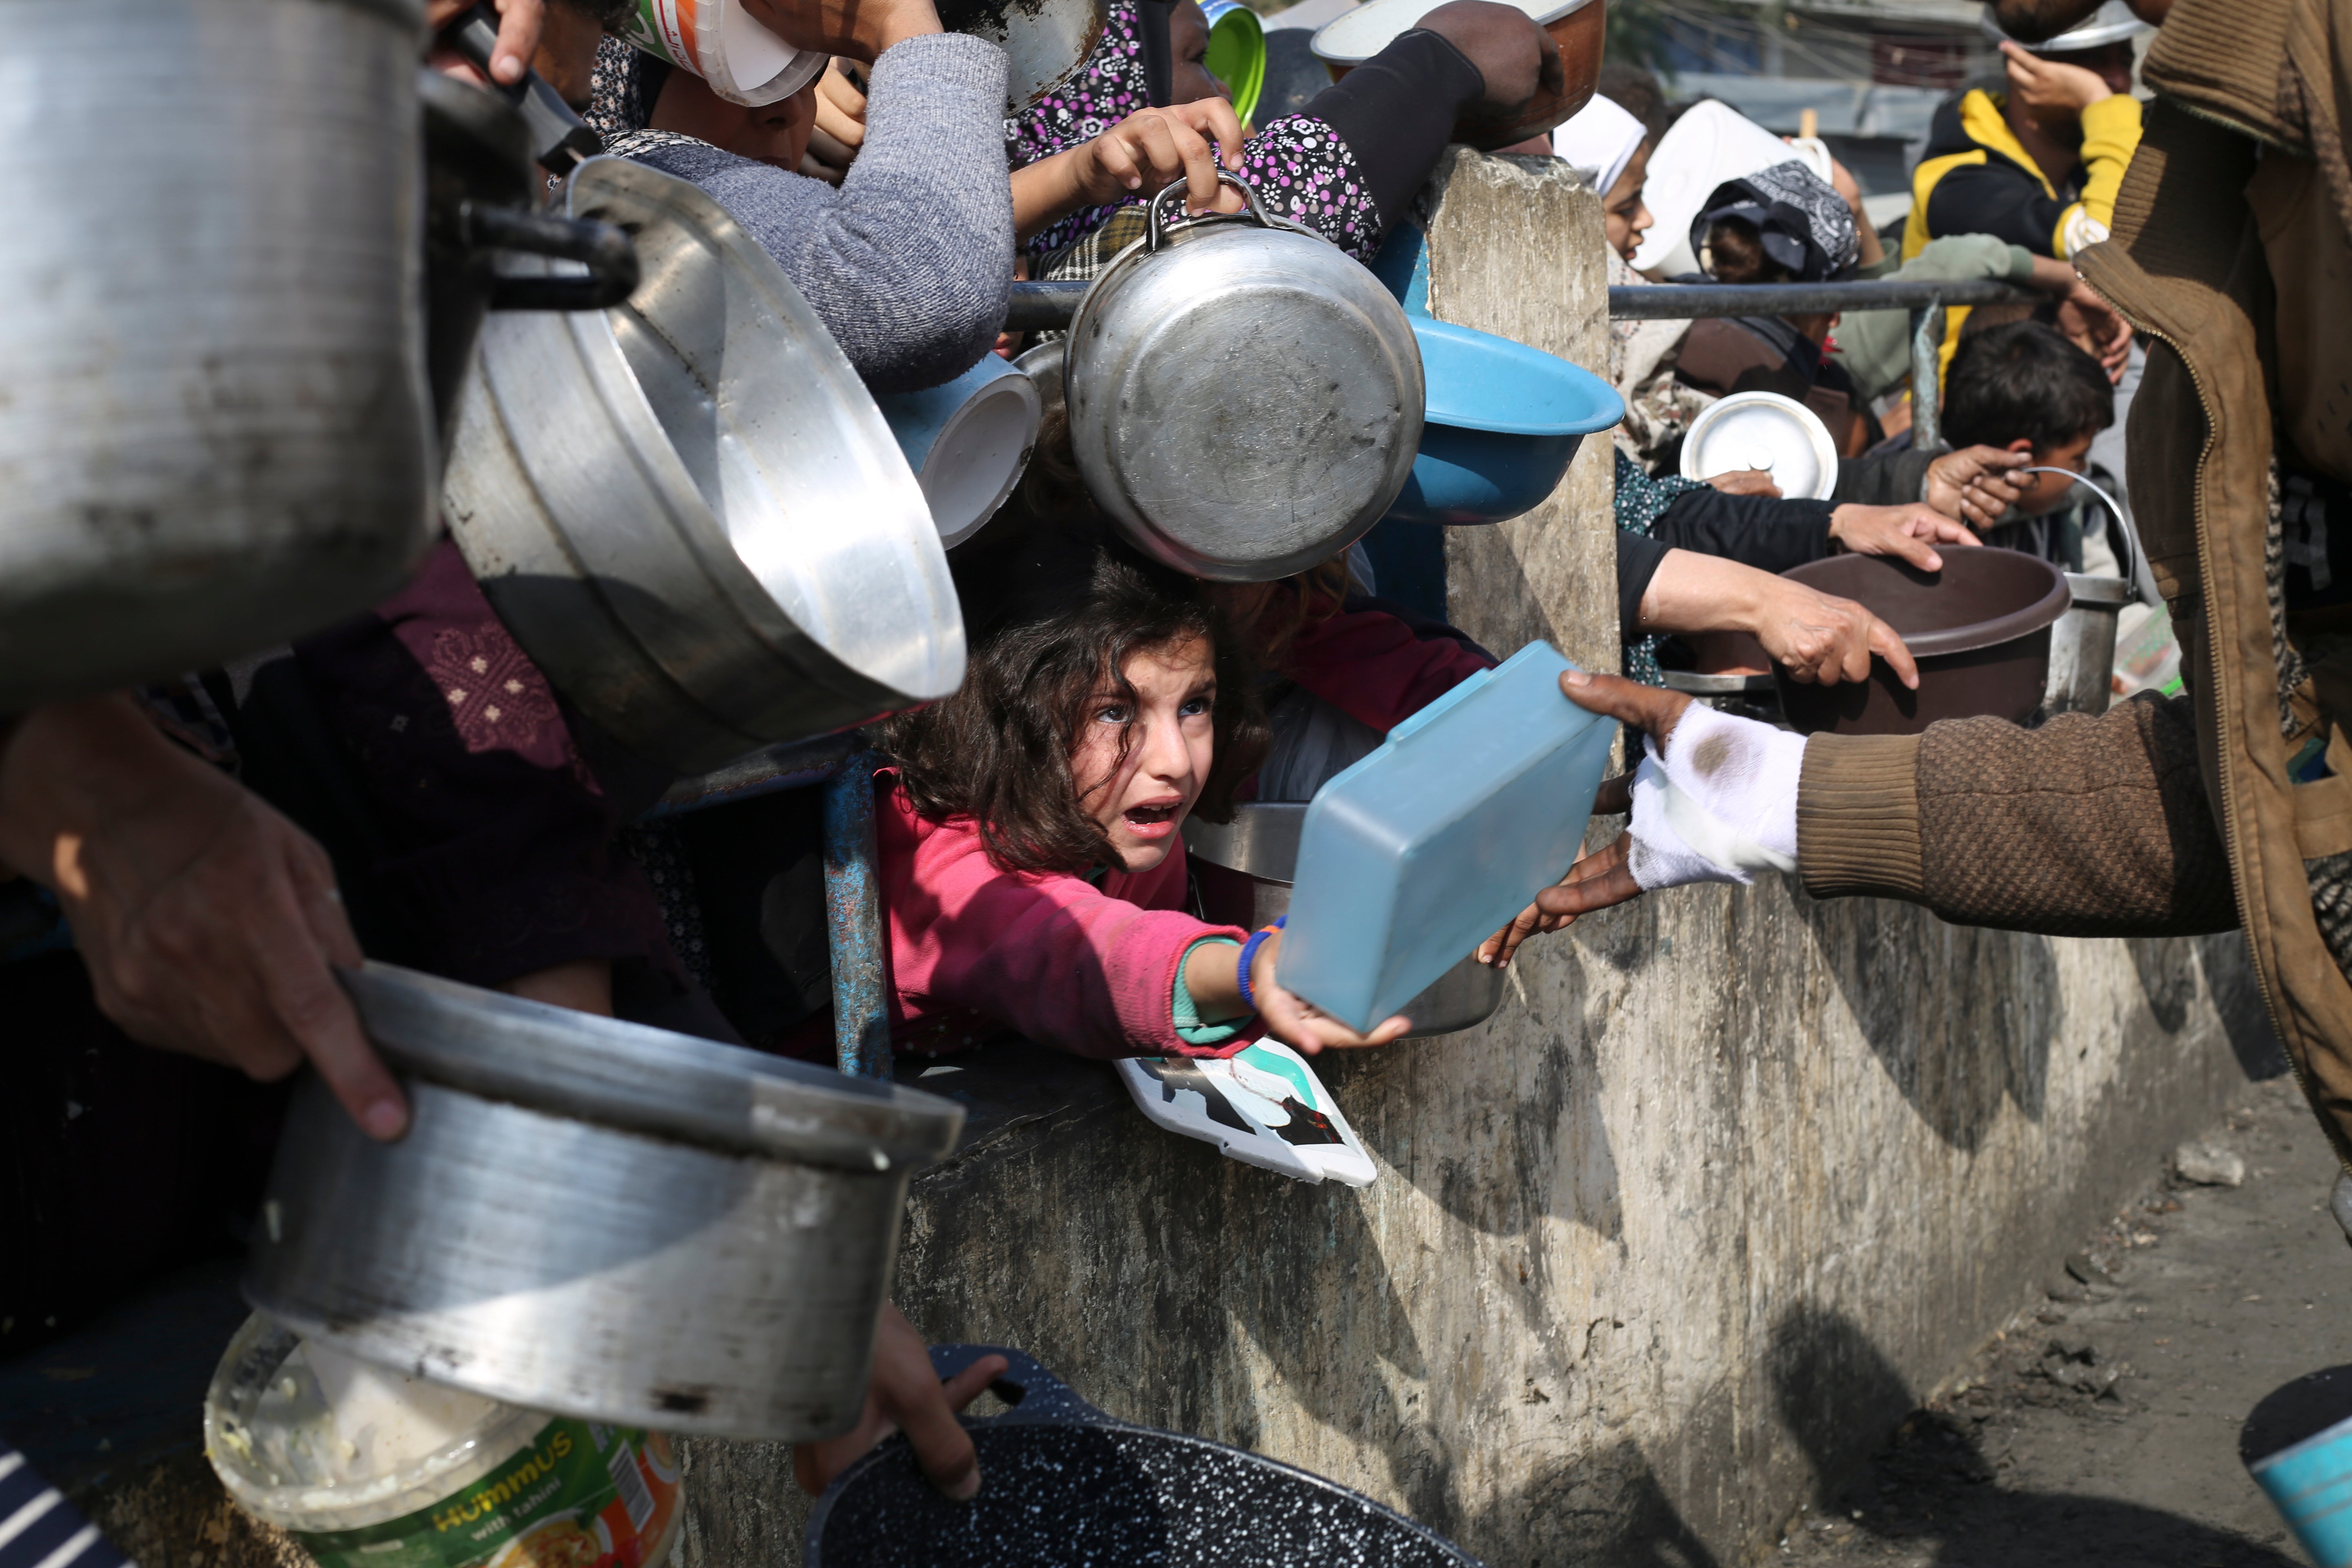 Palestinians line up for free food during the ongoing Israeli air and ground offensive on the Gaza Strip in Rafah